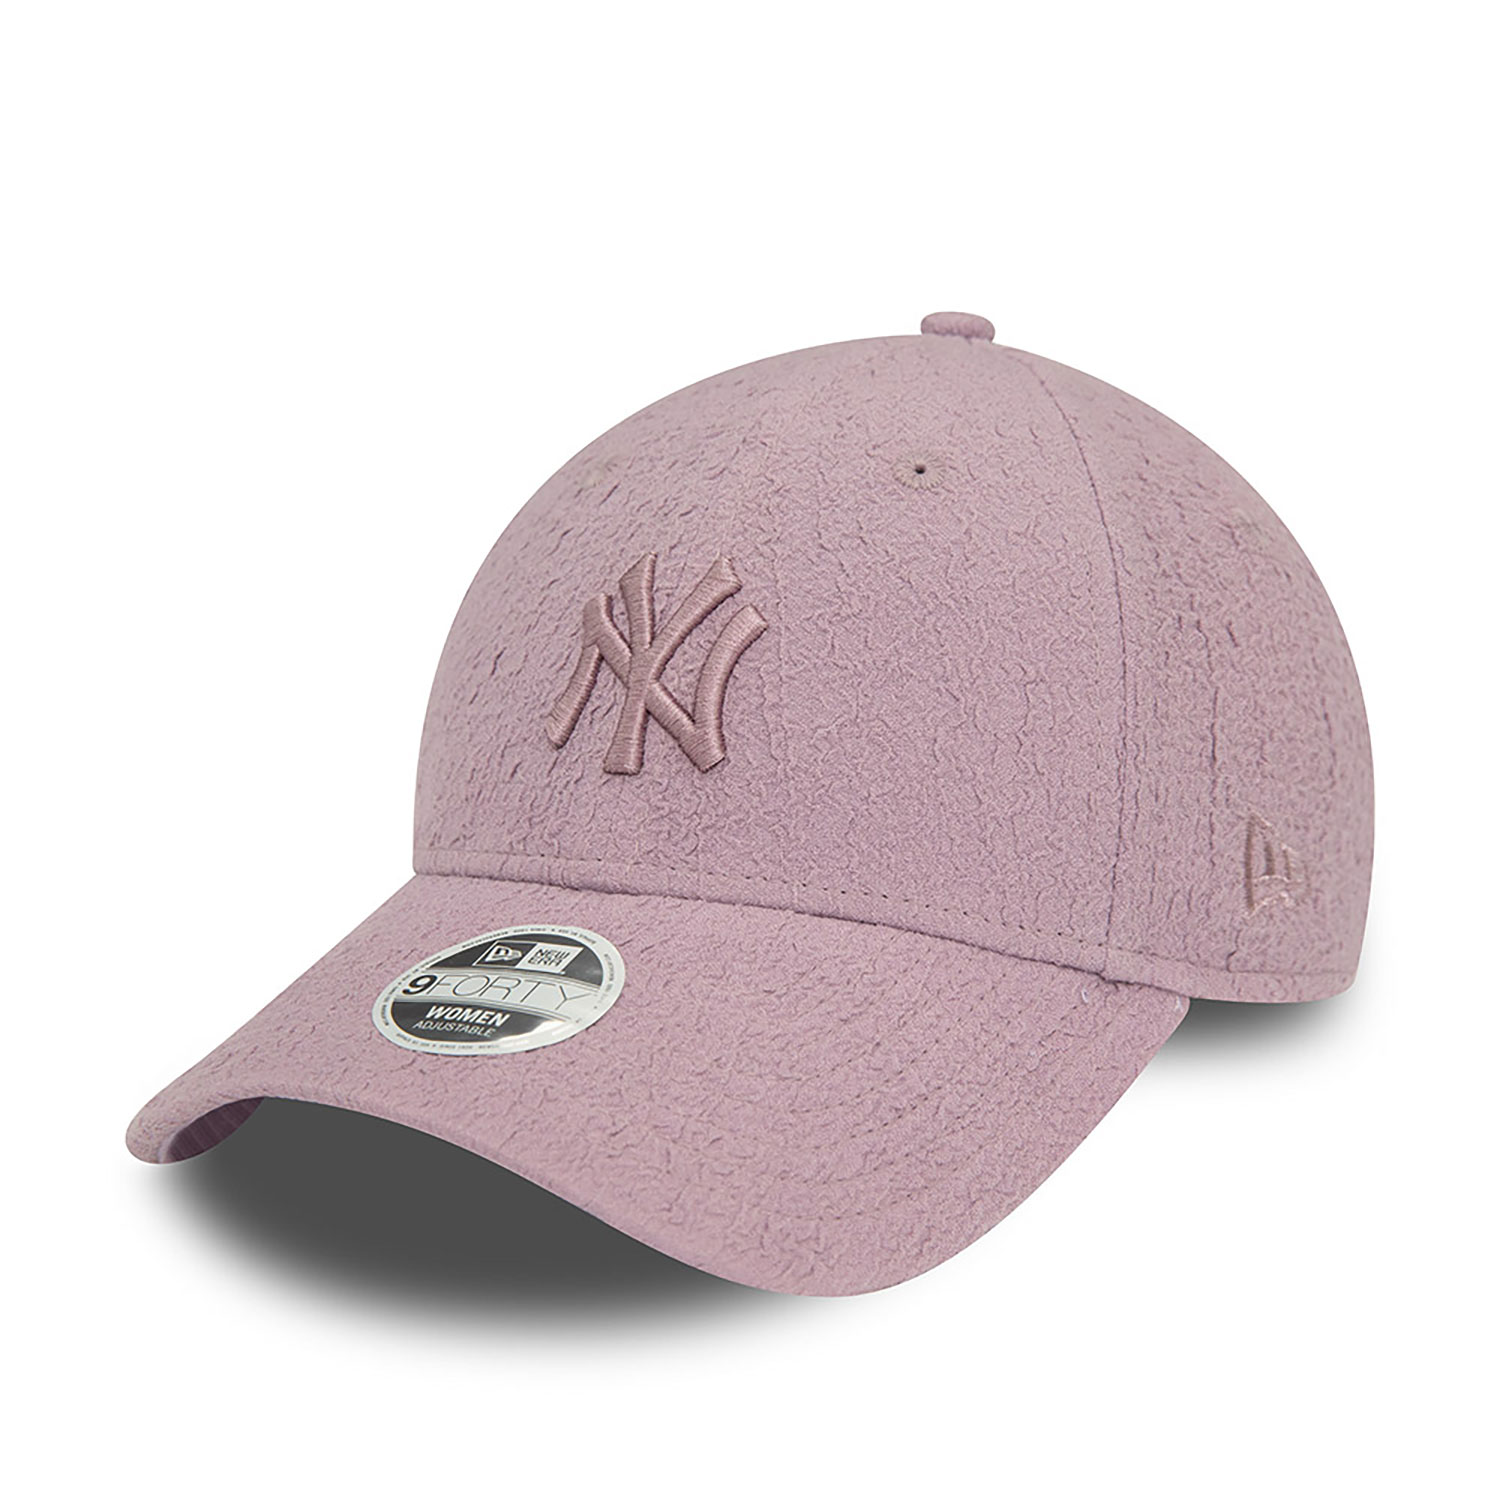 New York Yankees Womens Bubble Stitch Purple 9FORTY Adjustable Cap